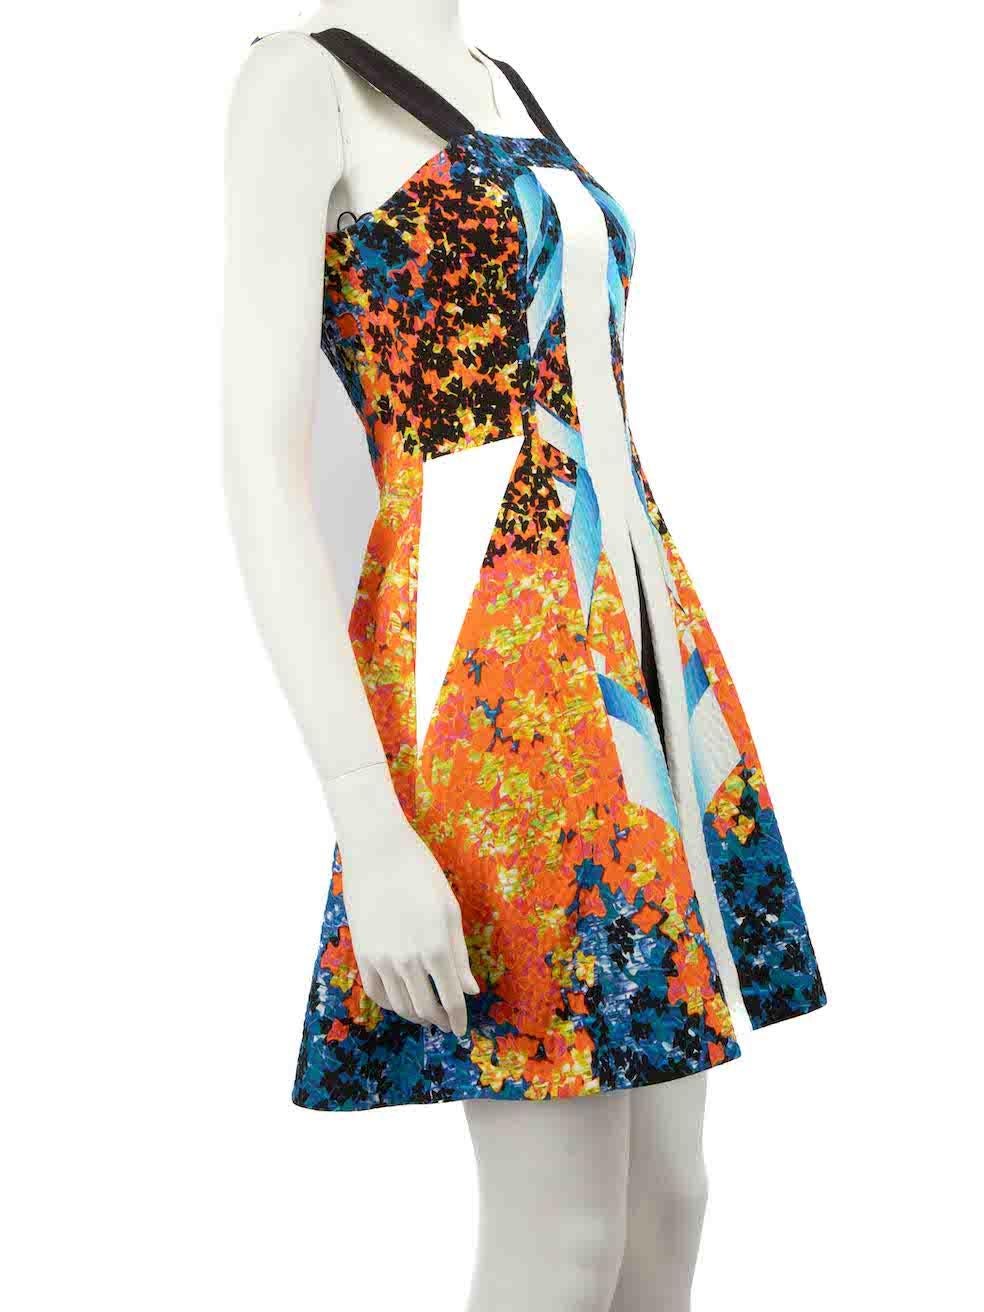 CONDITION is Very good. Minimal wear to dress is evident. Minimal wear to the neckline lining with discoloured marks on this used Peter Pilotto designer resale item.
 
 Details
 Multicolour
 Cotton
 Mini dress
 Abstract print pattern
 Textured
 V